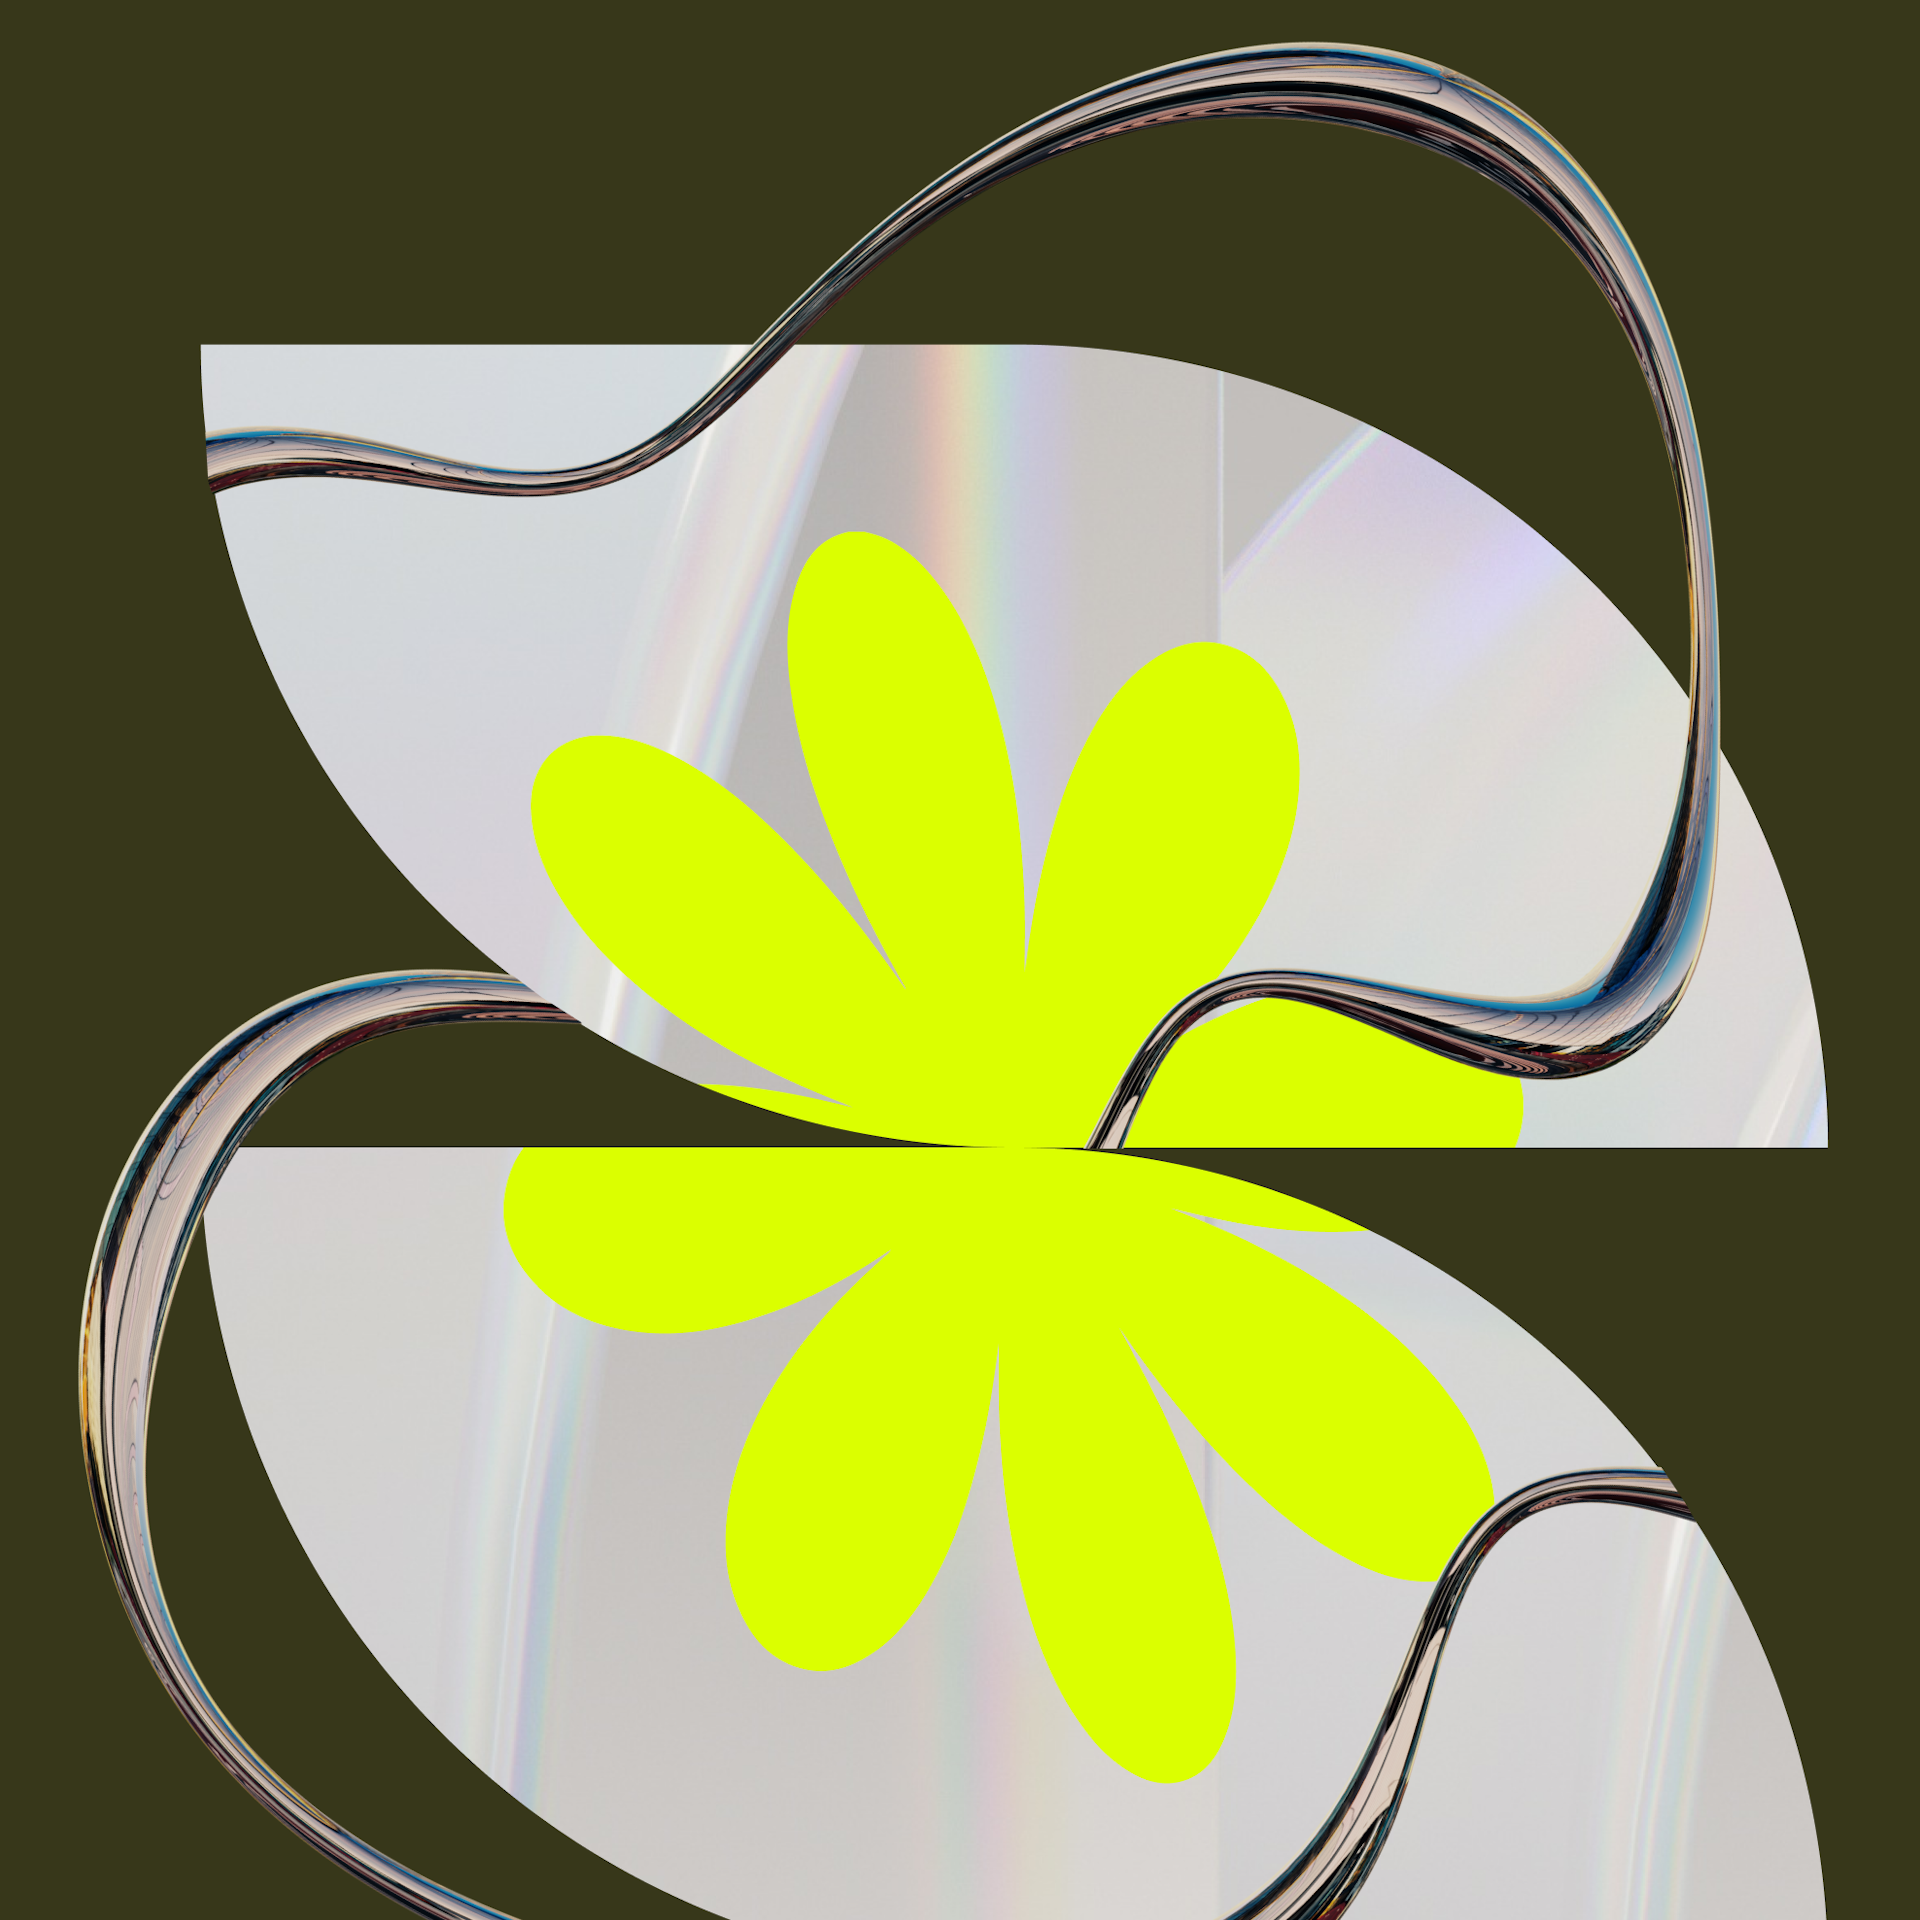 Two Big Human-branded shapes and a neon star on an olive green background